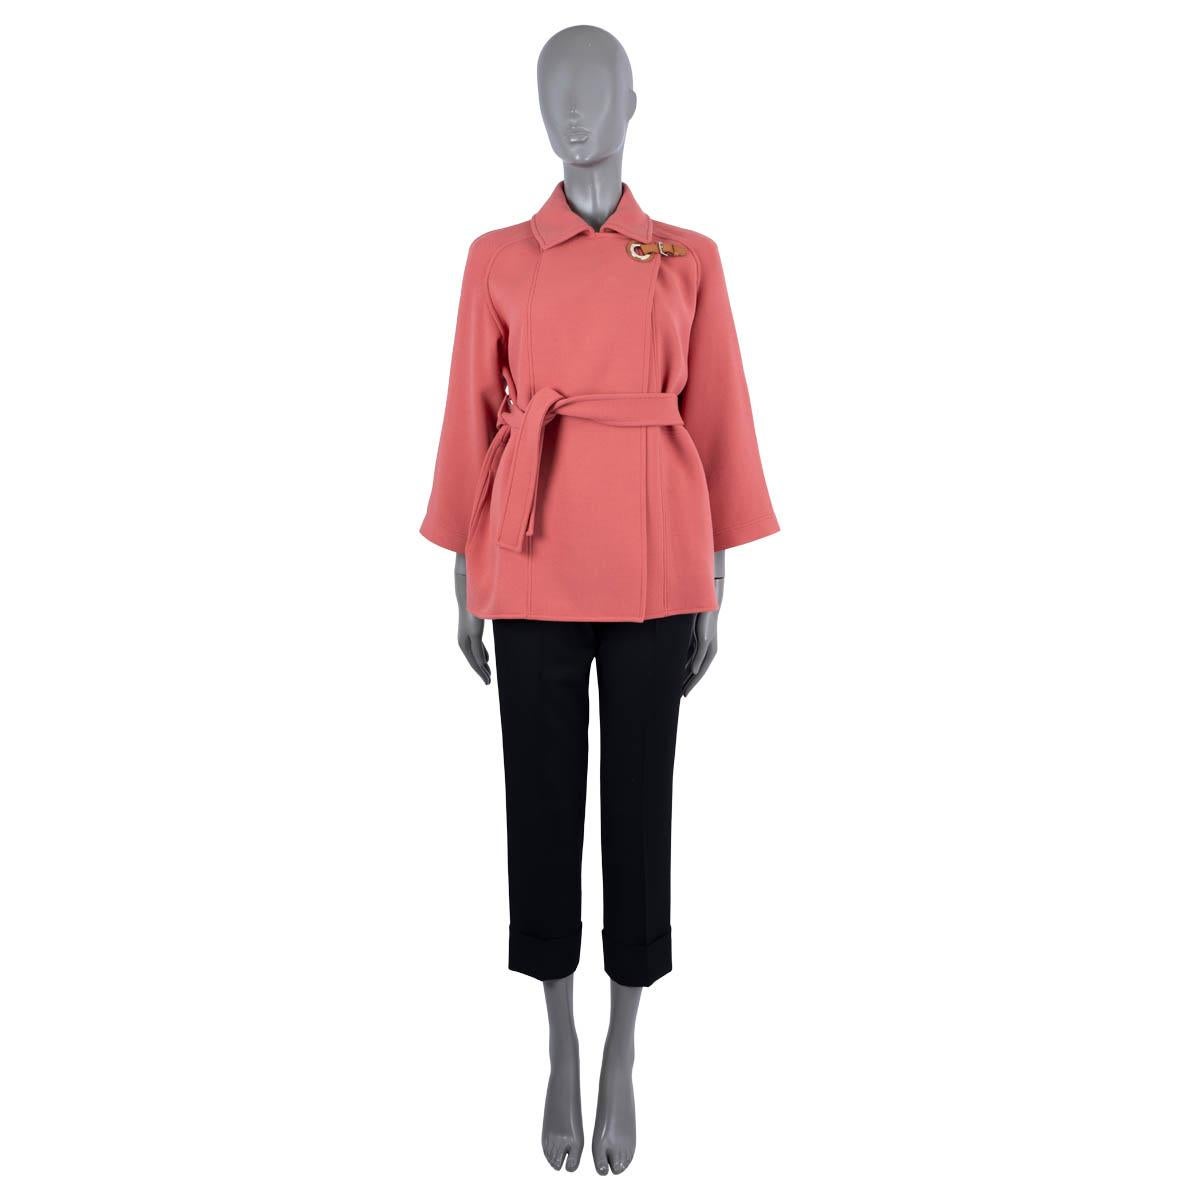 100% authentic Hermès peacoat in pink wool twill (with 1% polyamide). Features a eyelet and belt strap closure at the neck and ties with a belt. Unlined. Has been worn and is in excellent condition.

2022 Spring/Summer

Measurements
Tag